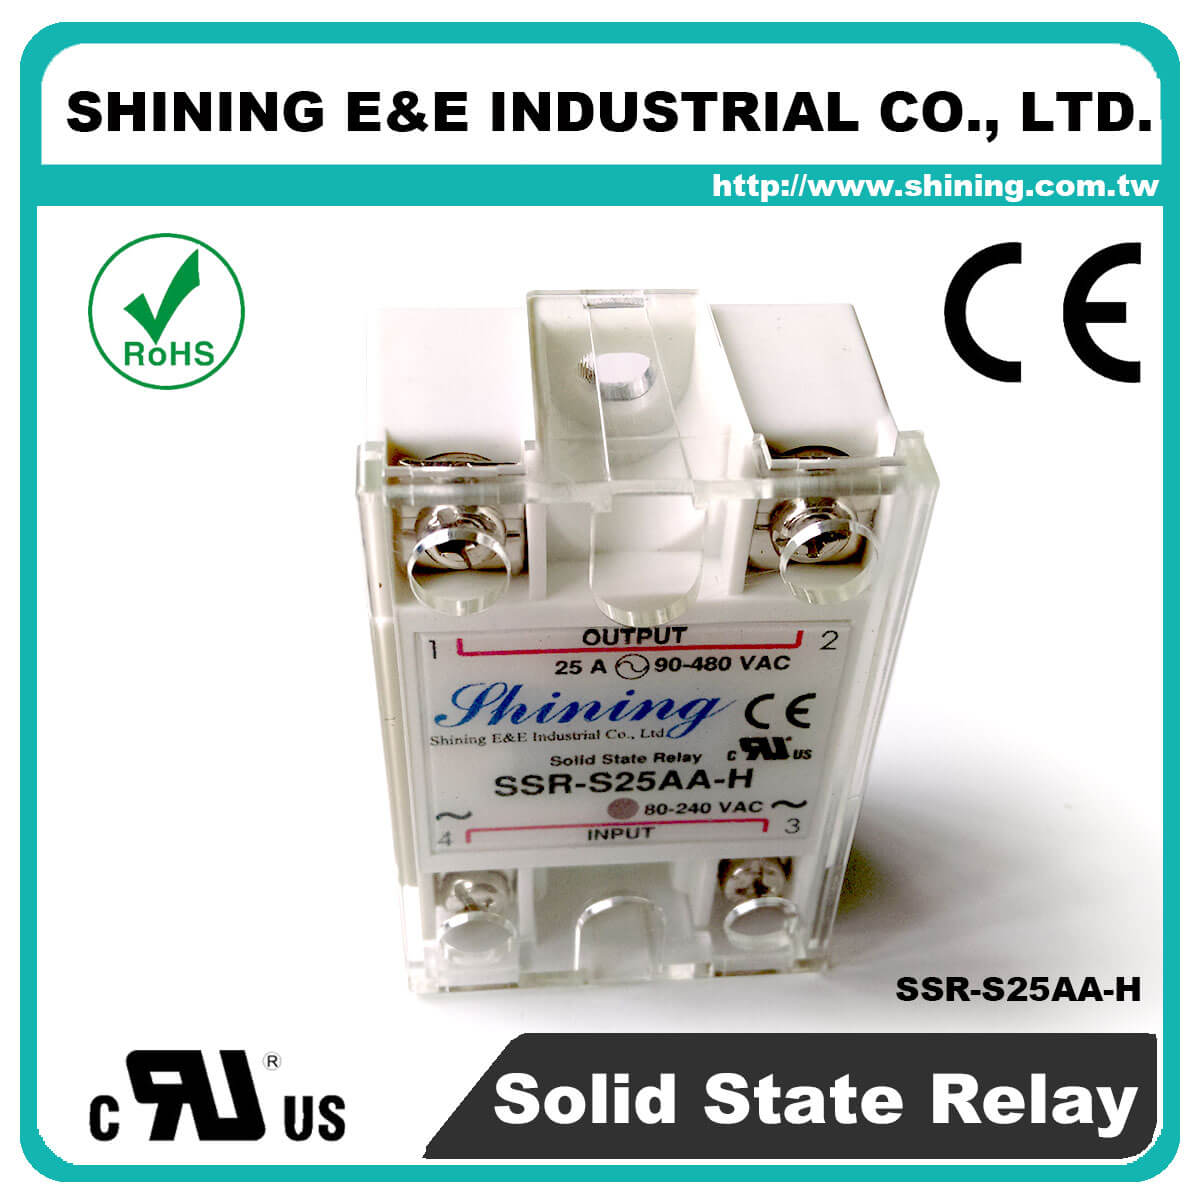 SSR-S25AA-H AC to AC 25A 480VAC Single Phase Solid State Relay